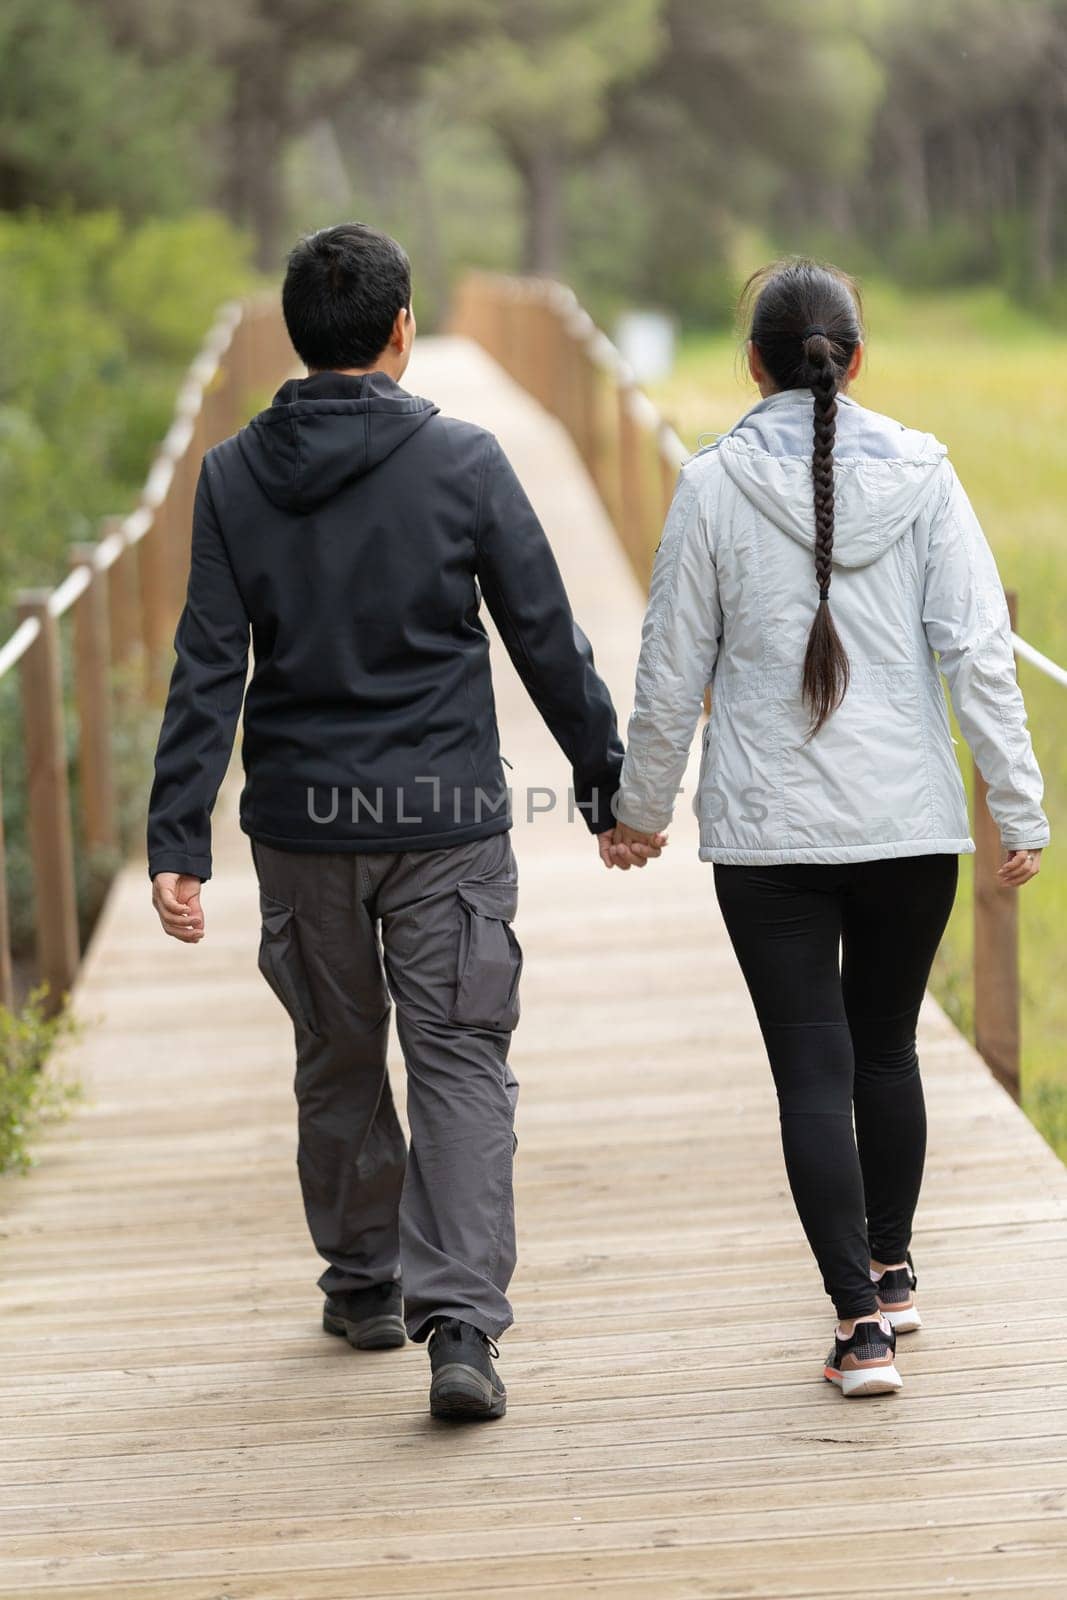 A man and woman are walking on a wooden bridge. The man is wearing a black jacket and the woman is wearing a gray jacket. They are holding hands and walking together